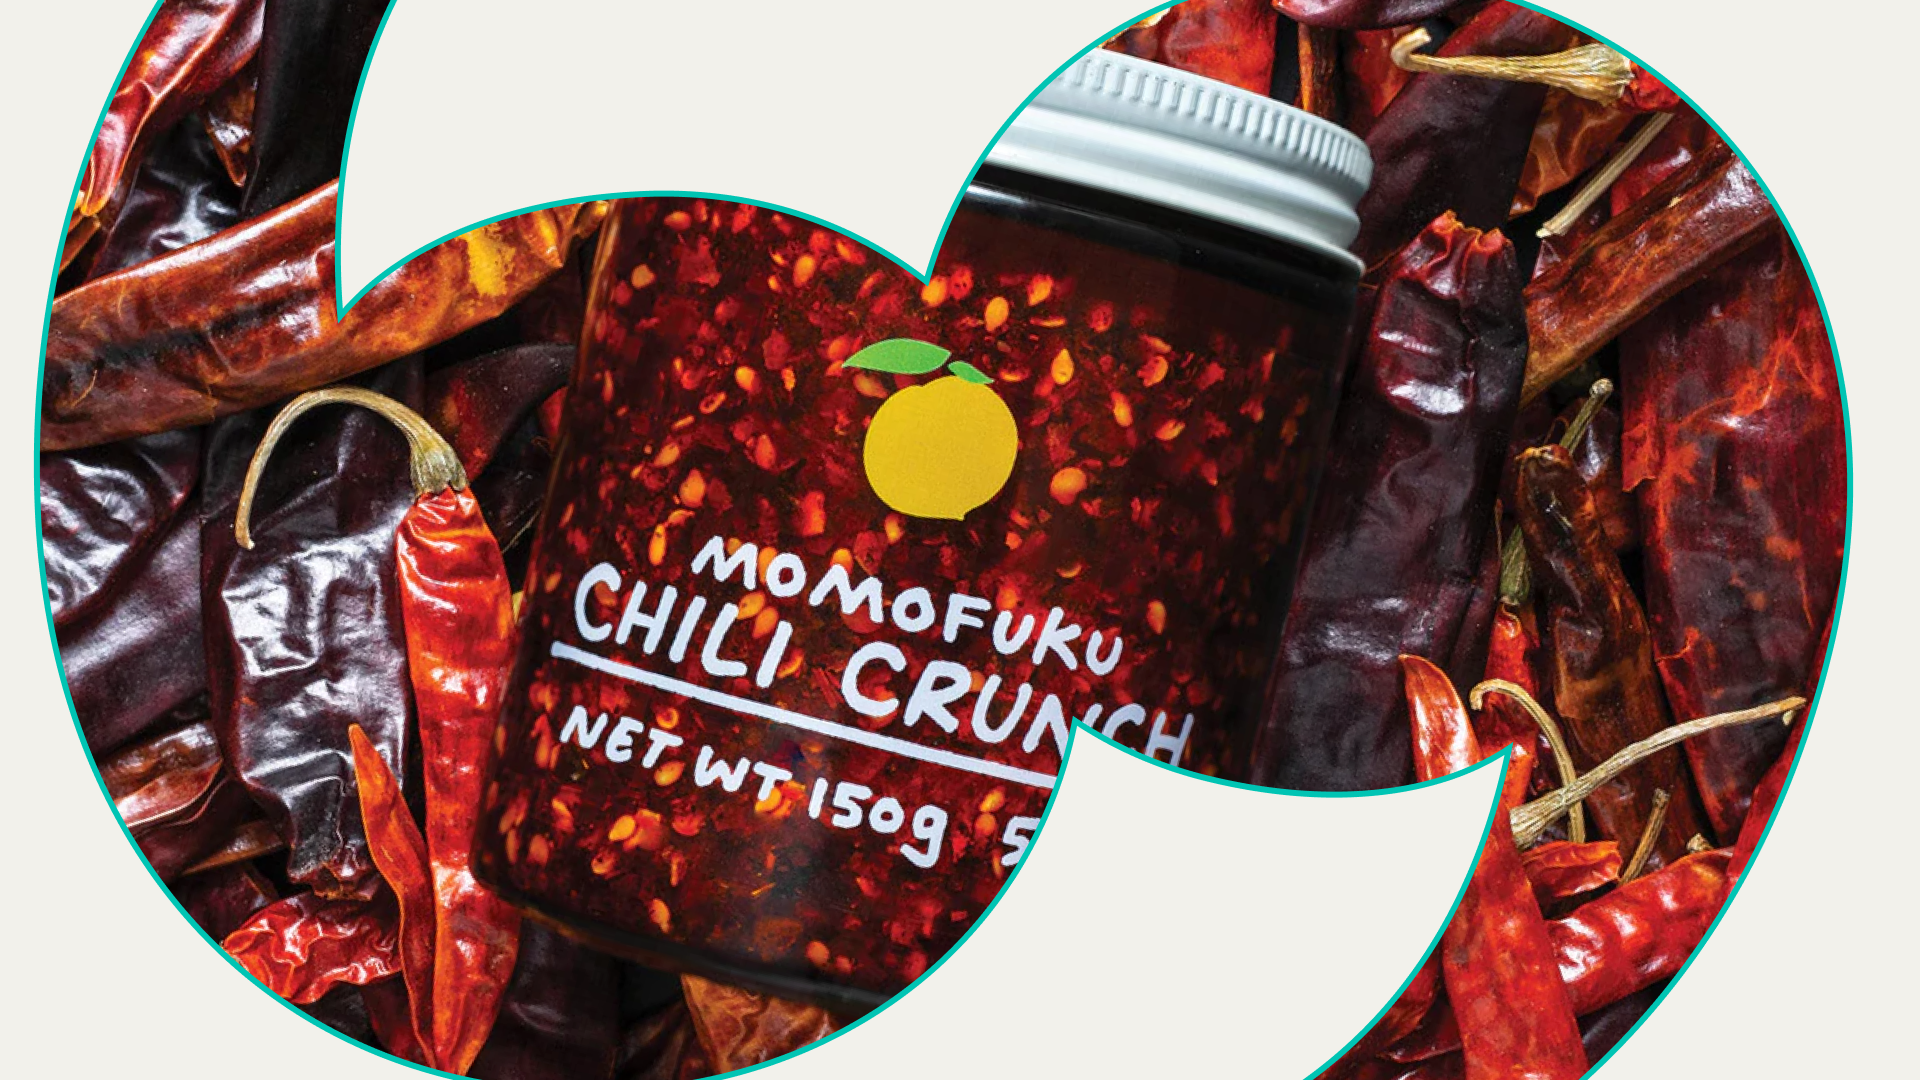 Momofuku chili oil for best exotic condiments to try